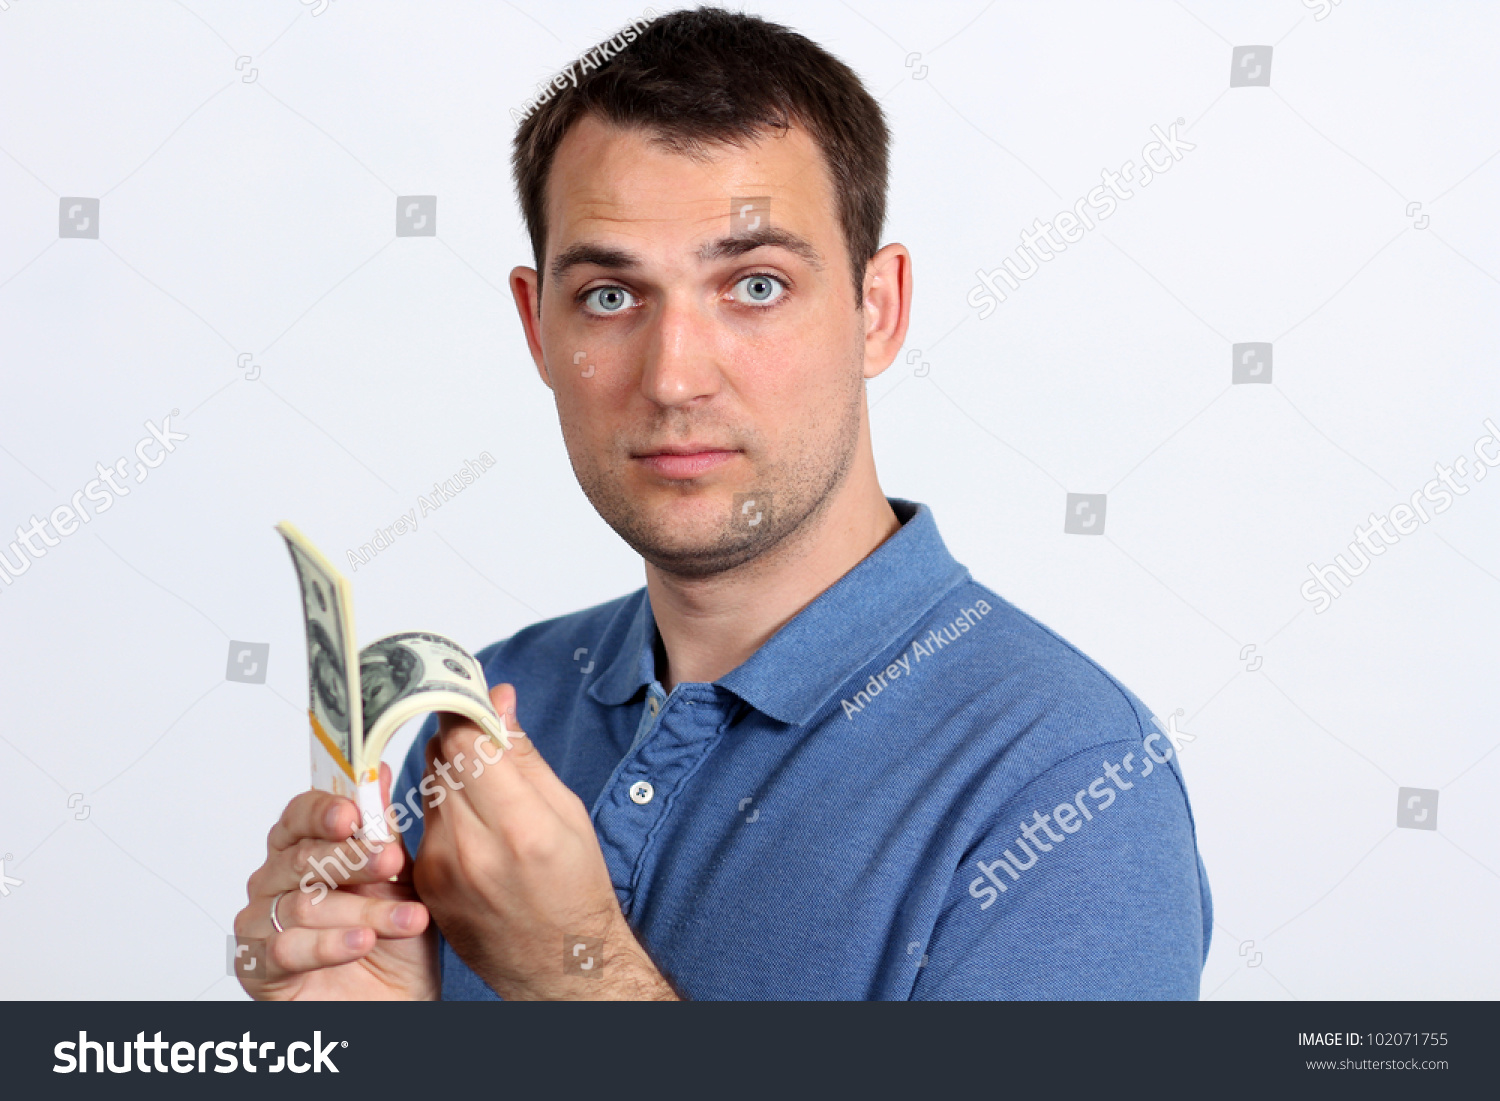 Man With Money Showing Thumbs Up Stock Photo 102071755 : Shutterstock